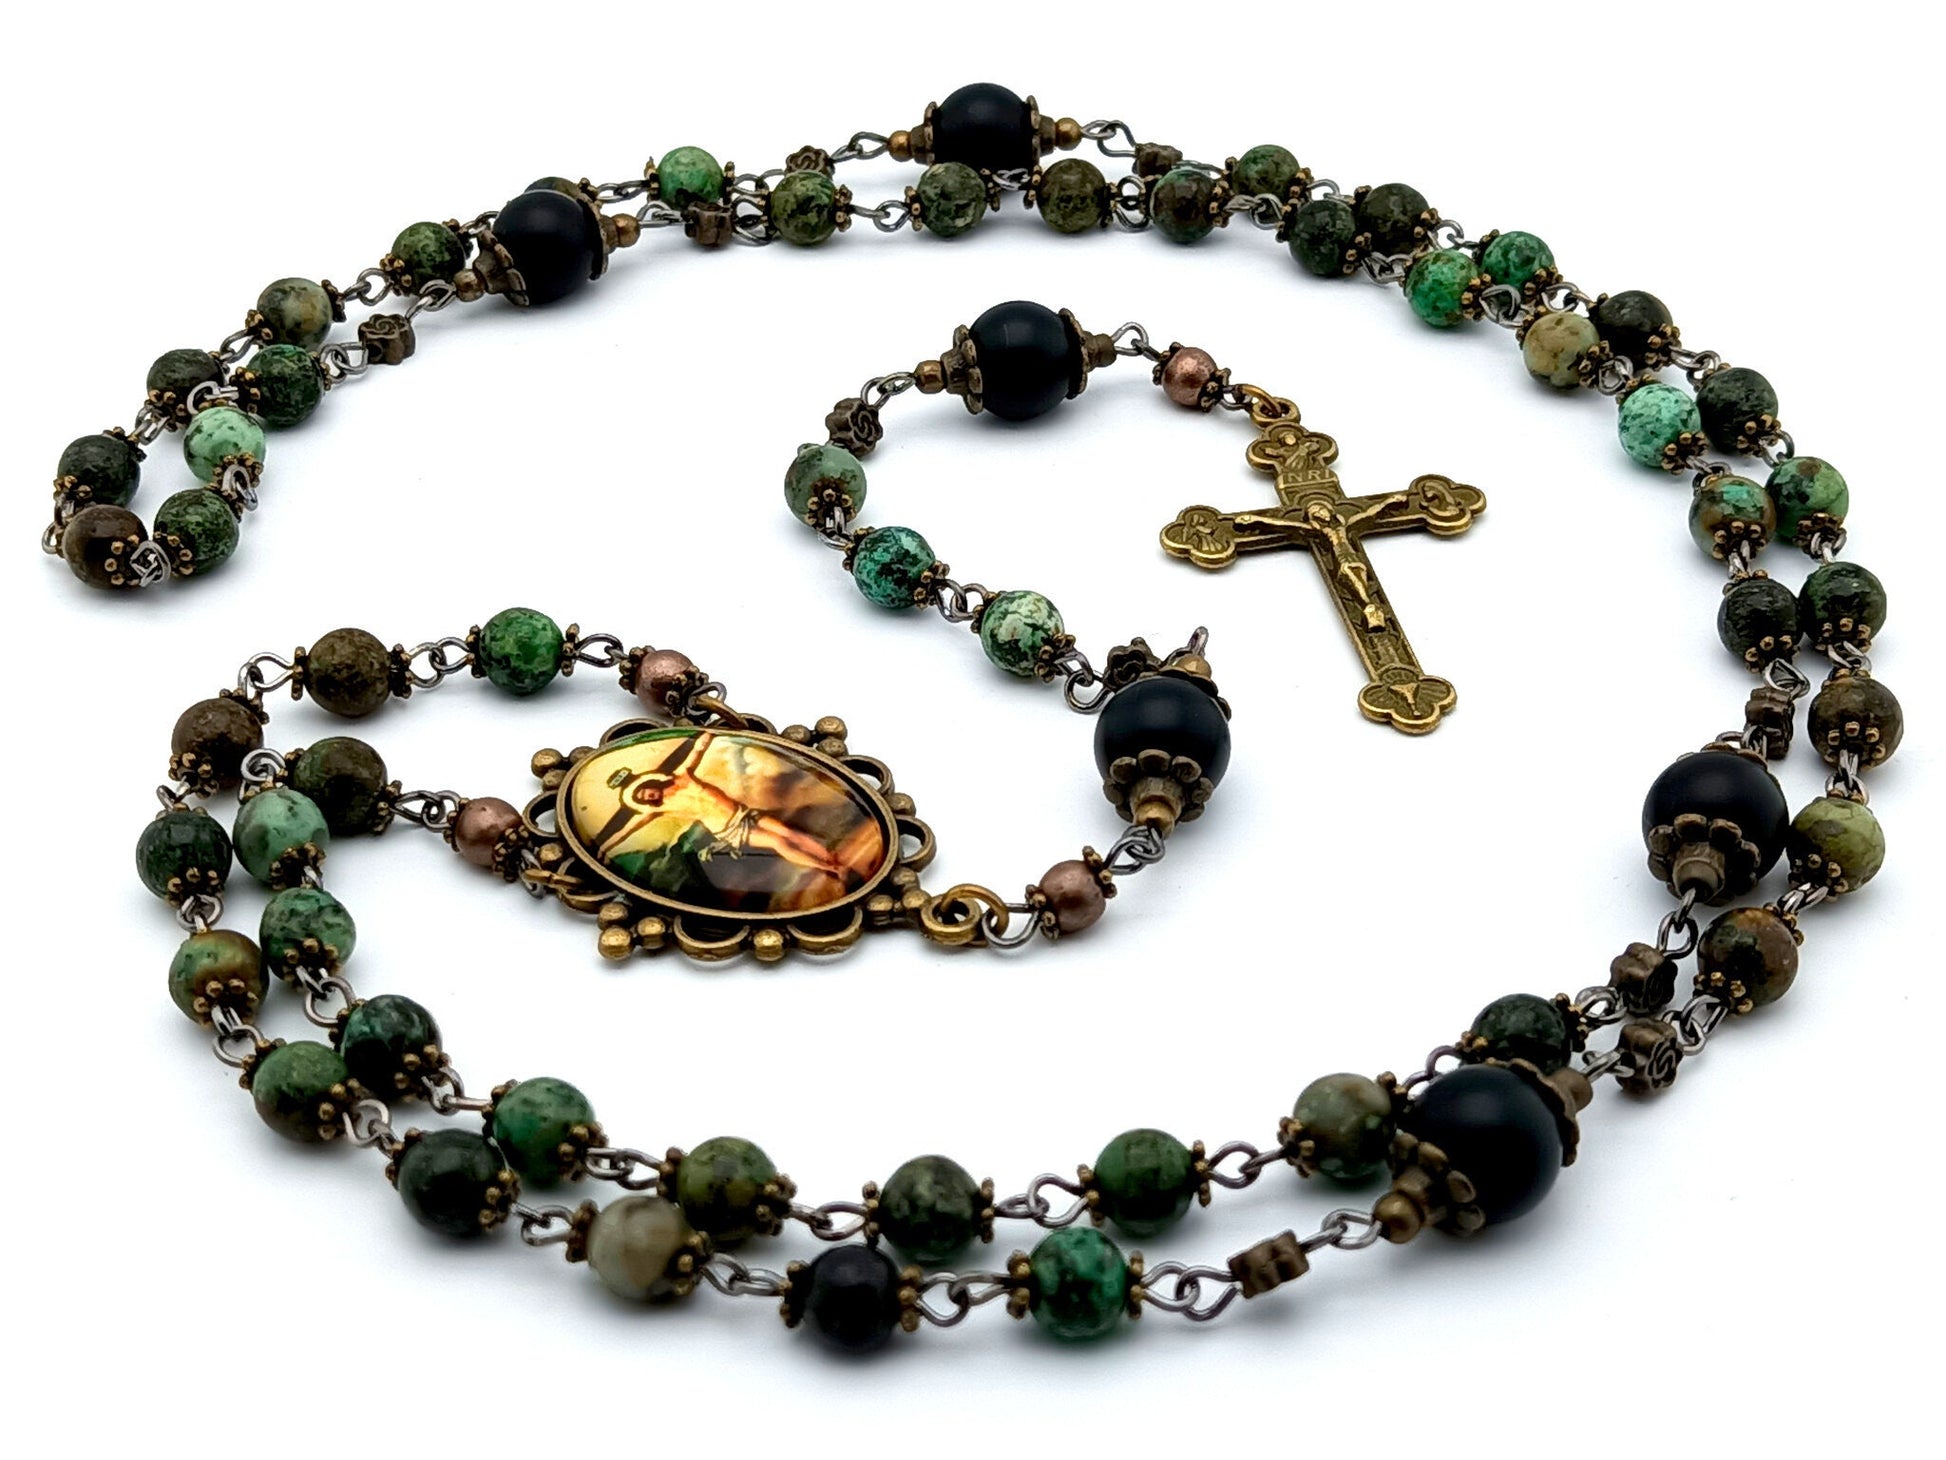 The Crucifixion unique rosary beads with green jasper and onyx gemstone beads, bronze crucifix and picture centre medal.